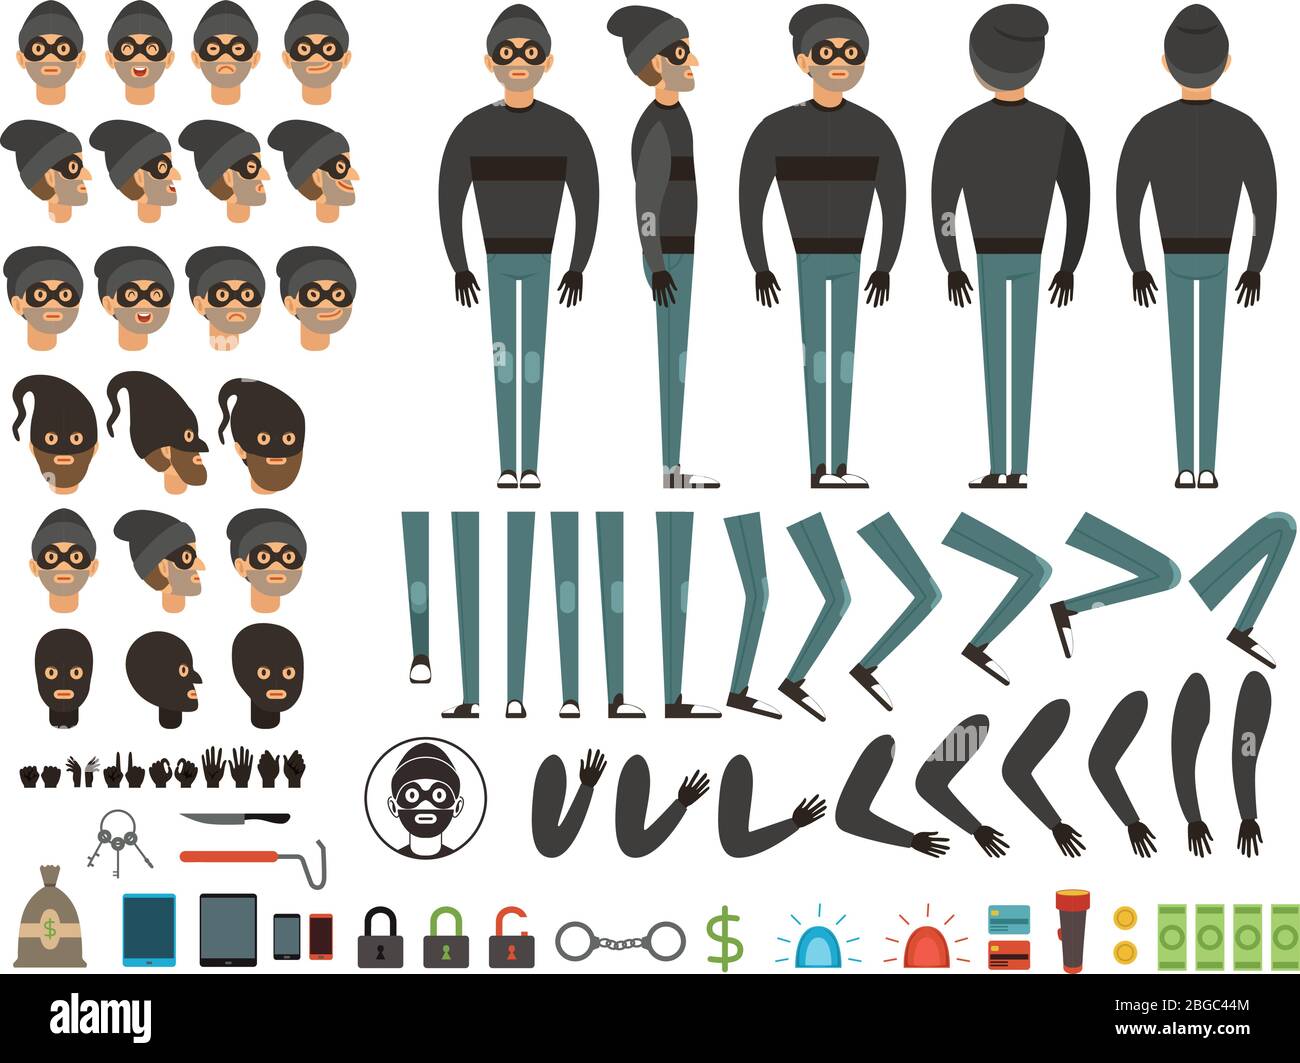 Mascot or character design of bandit. Vector creation kit with specific elements and different body parts Stock Vector